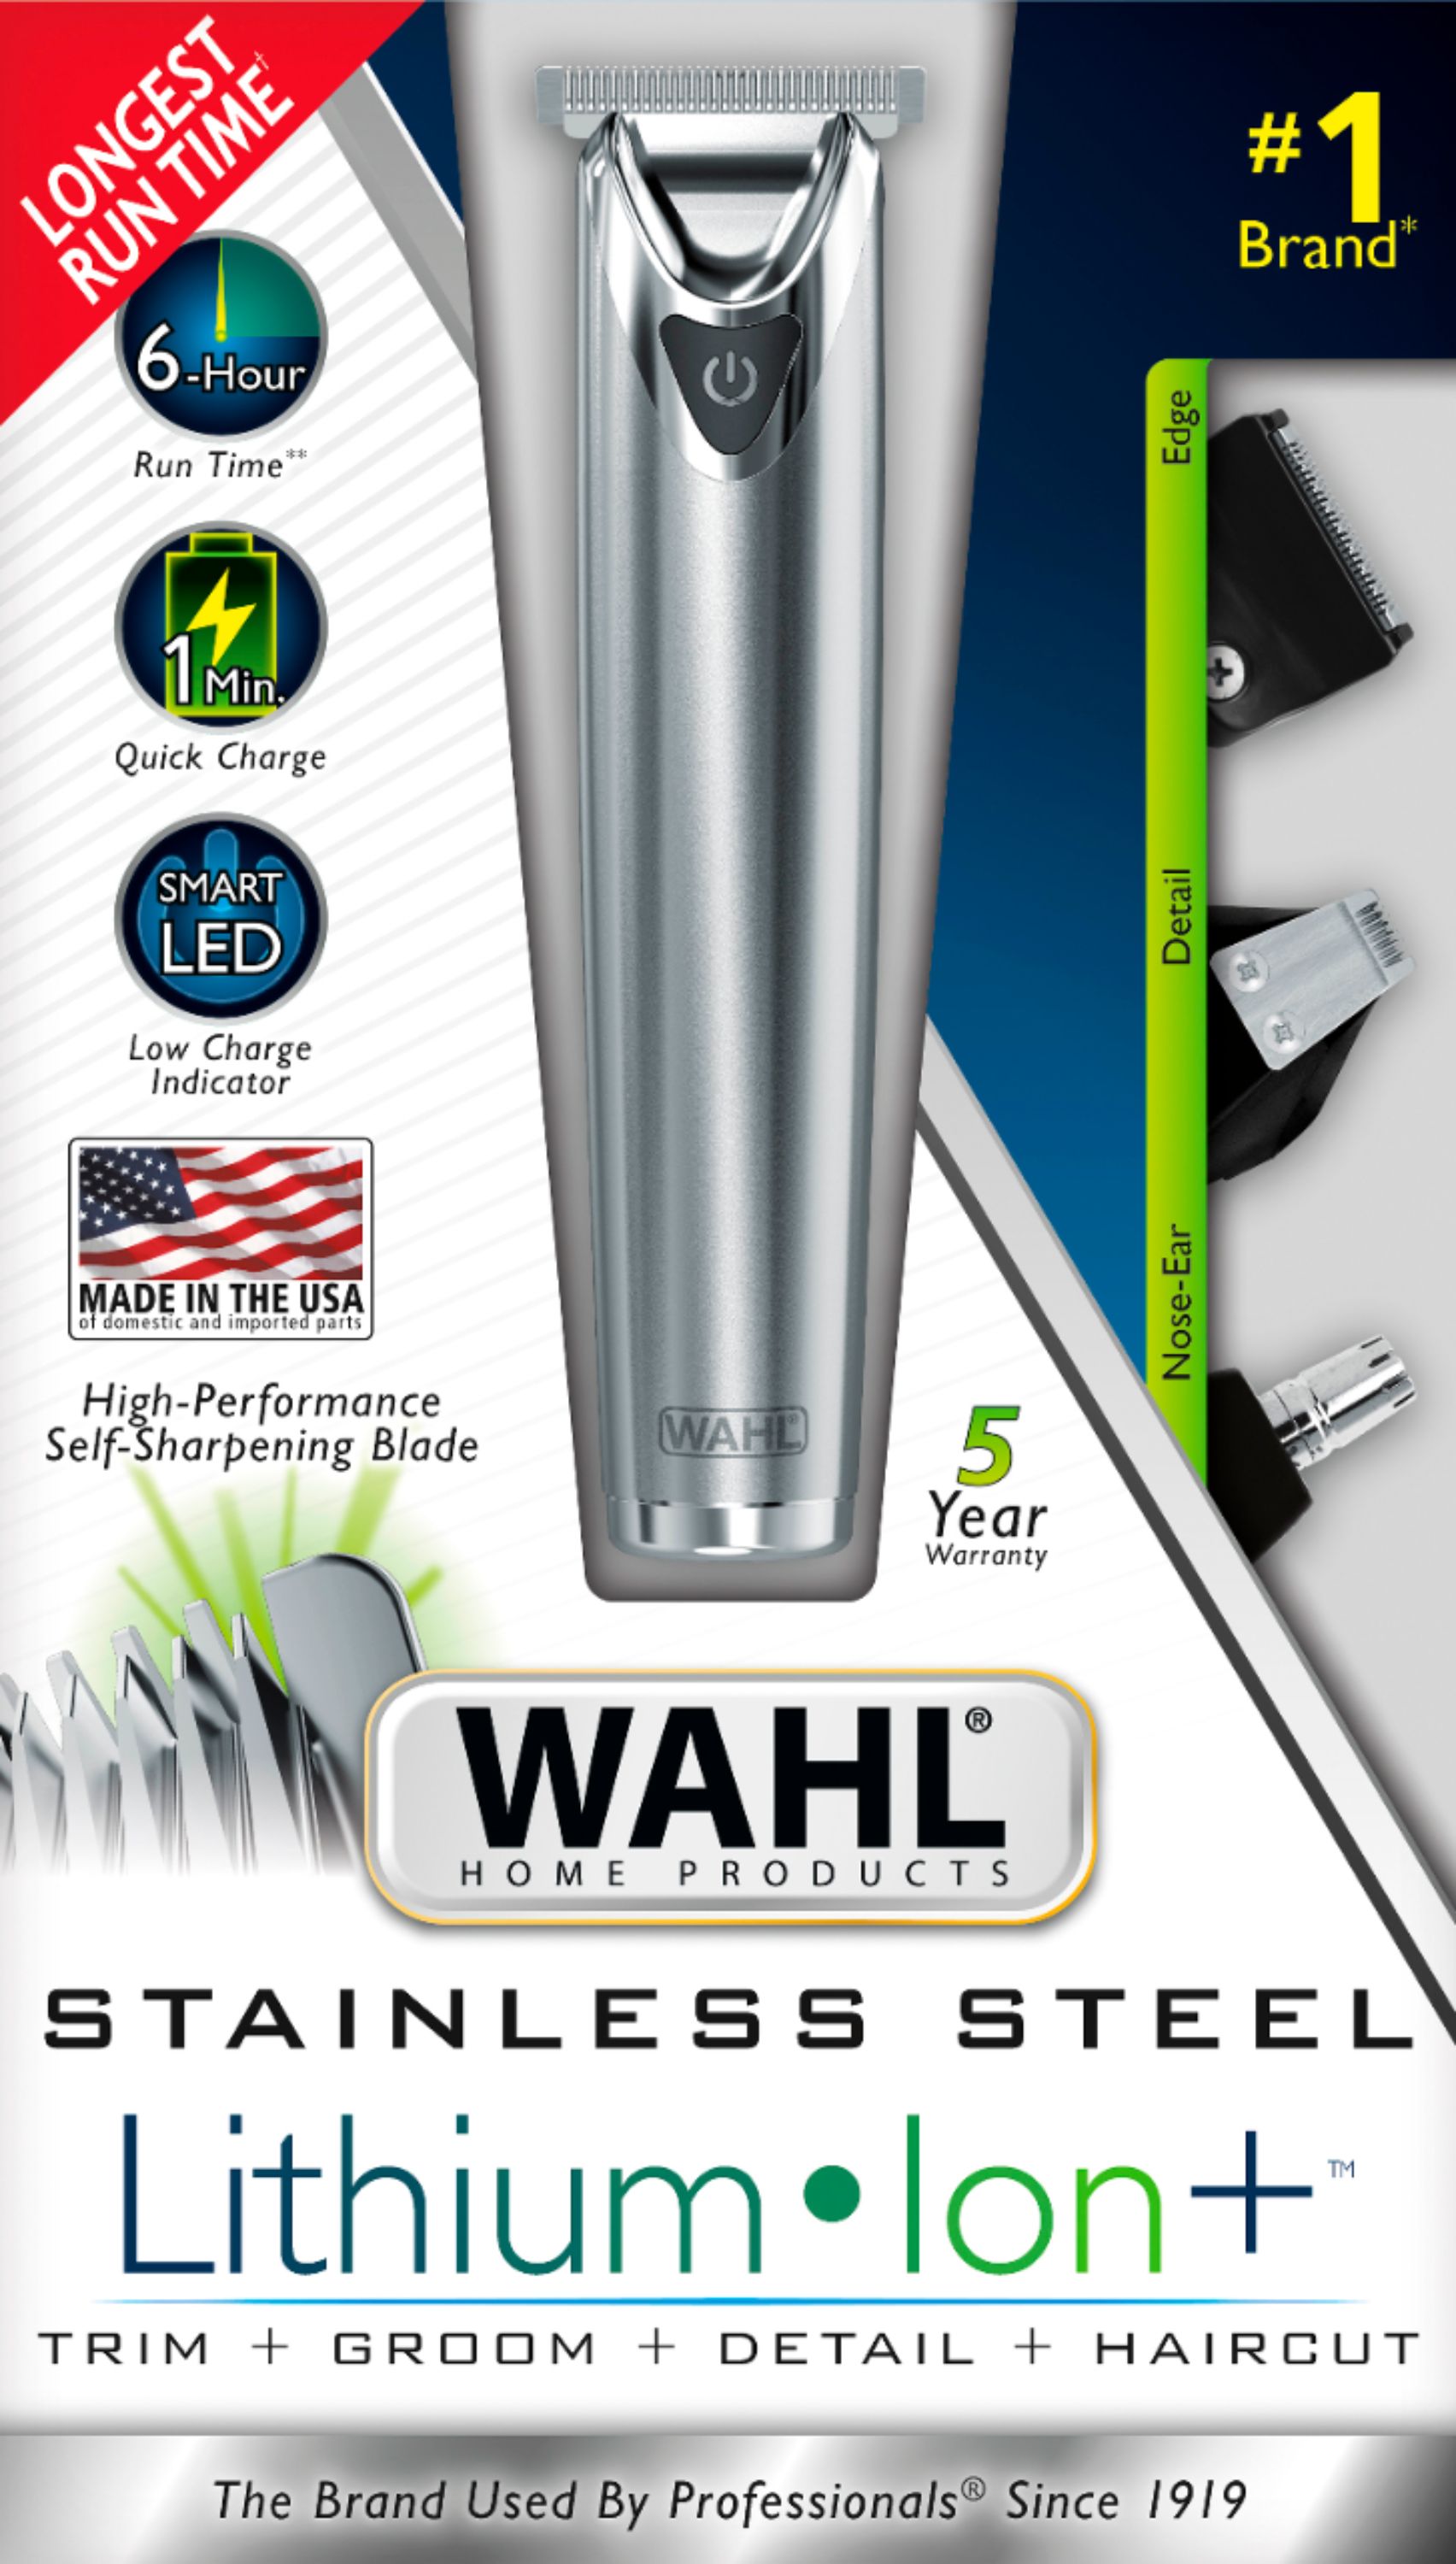 wahl clipper stainless steel beard trimmer 9818